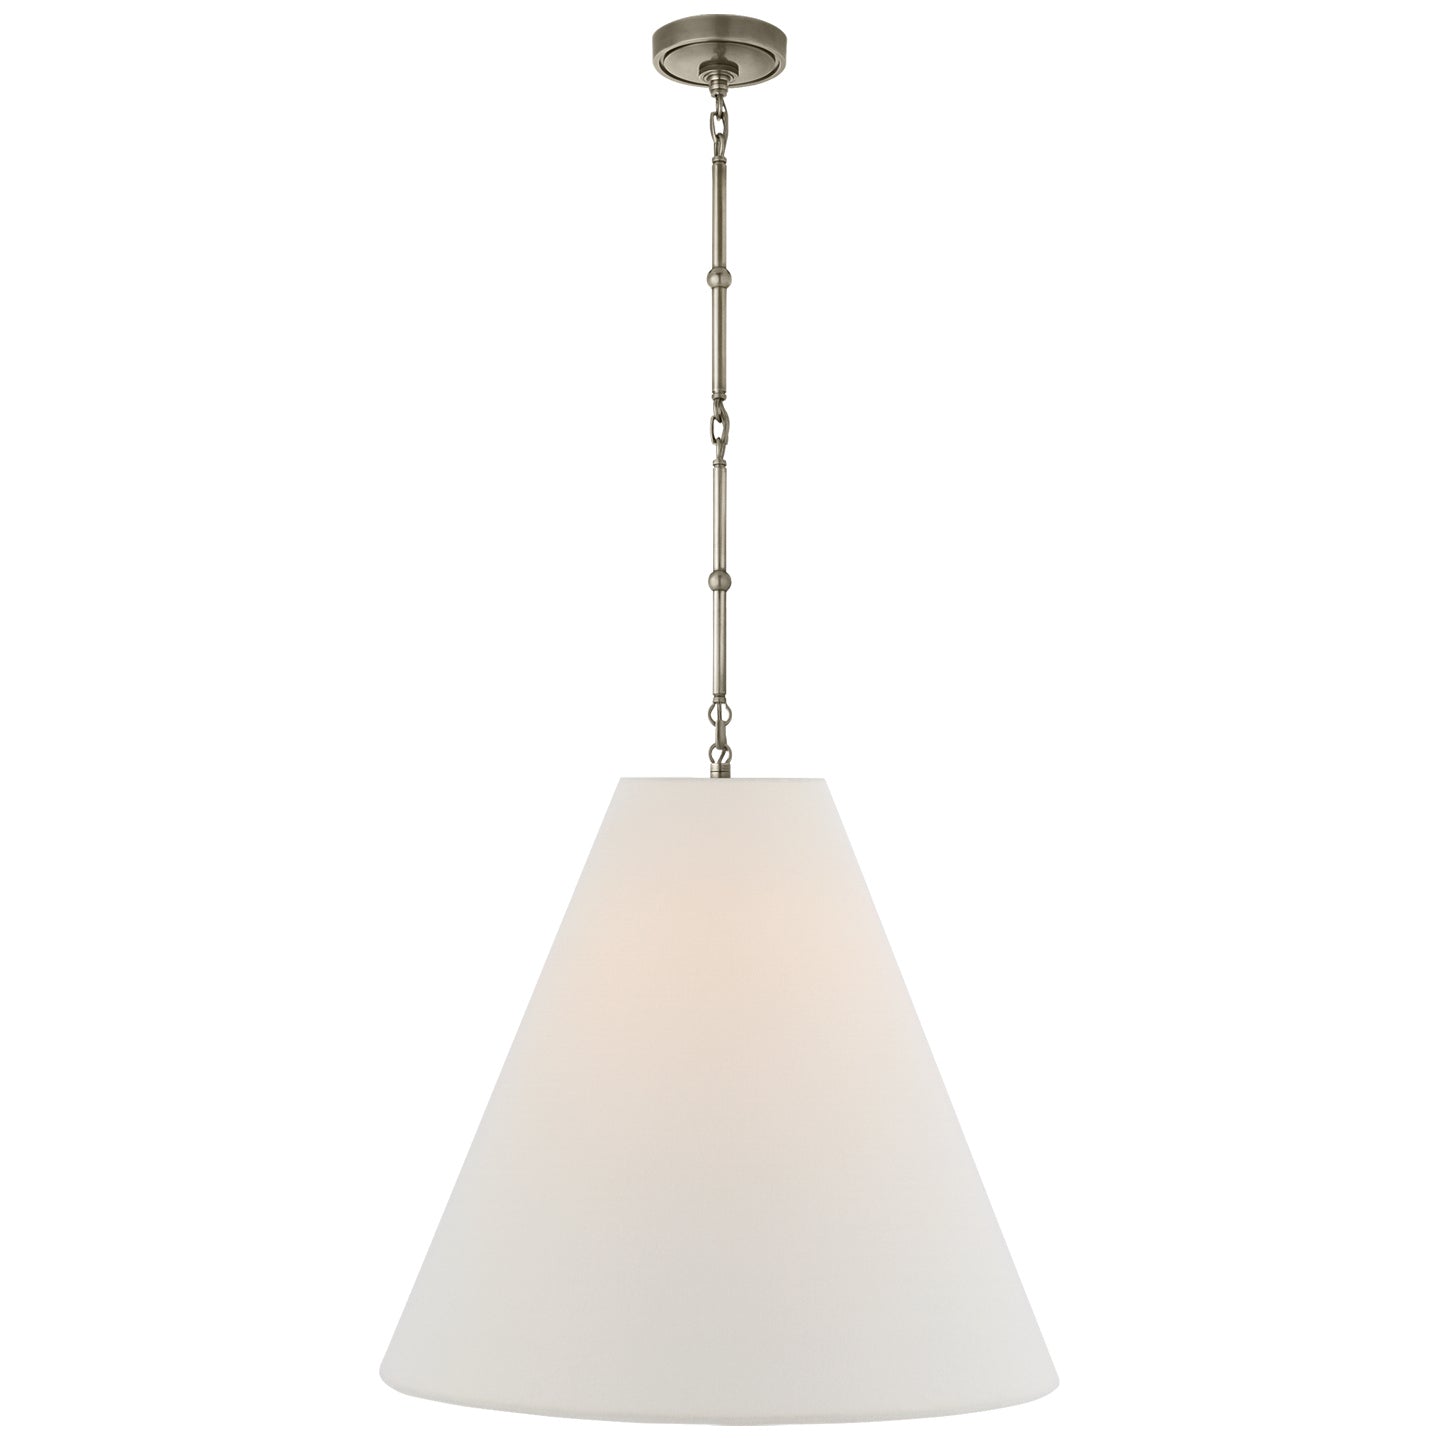 Load image into Gallery viewer, Visual Comfort Signature - TOB 5014AN-L - One Light Hanging Lantern - Goodman - Antique Nickel
